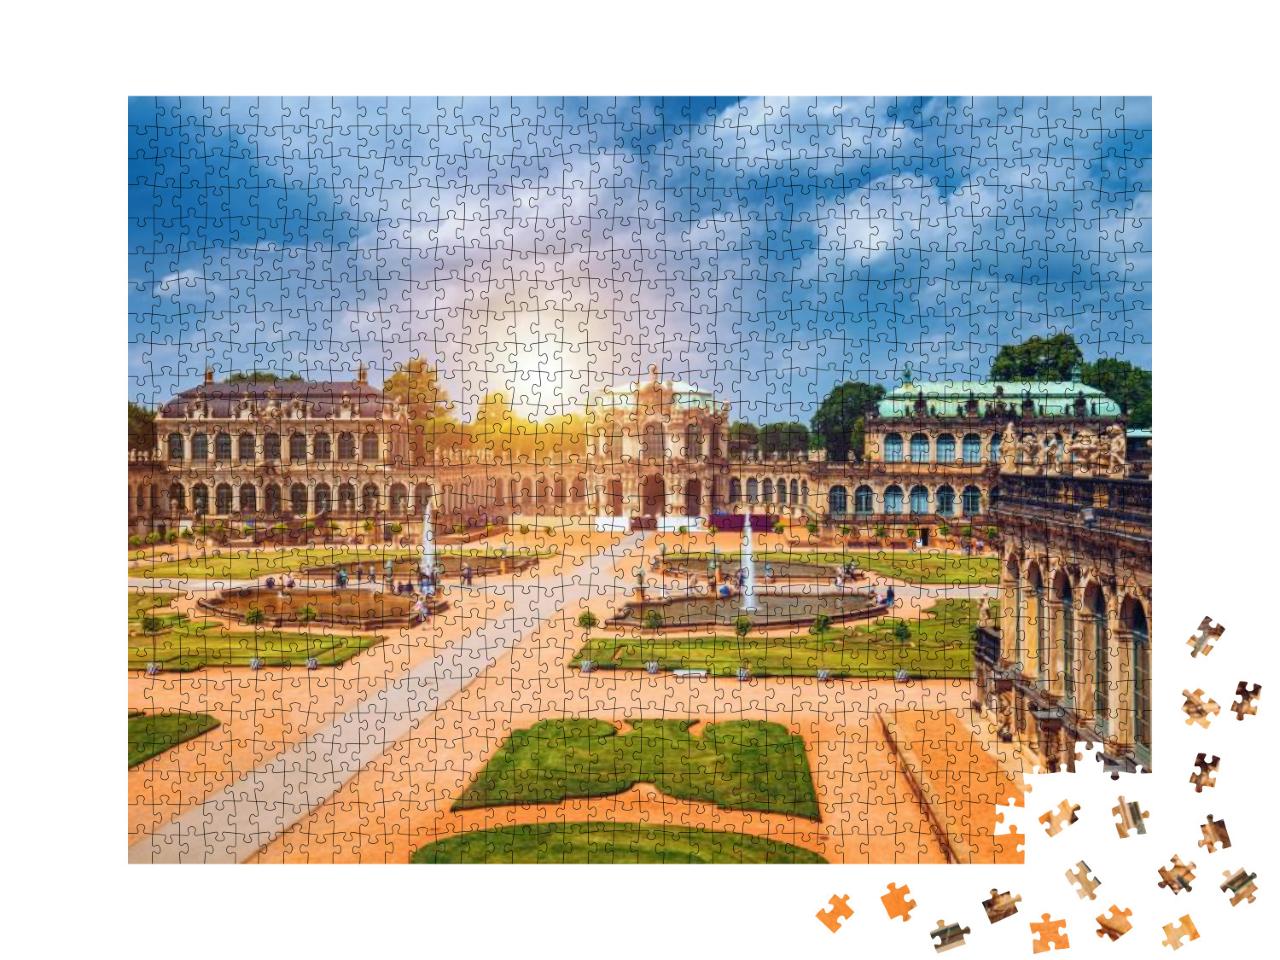 Famous Zwinger Palace Der Dresdner Zwinger Art Gallery of... Jigsaw Puzzle with 1000 pieces